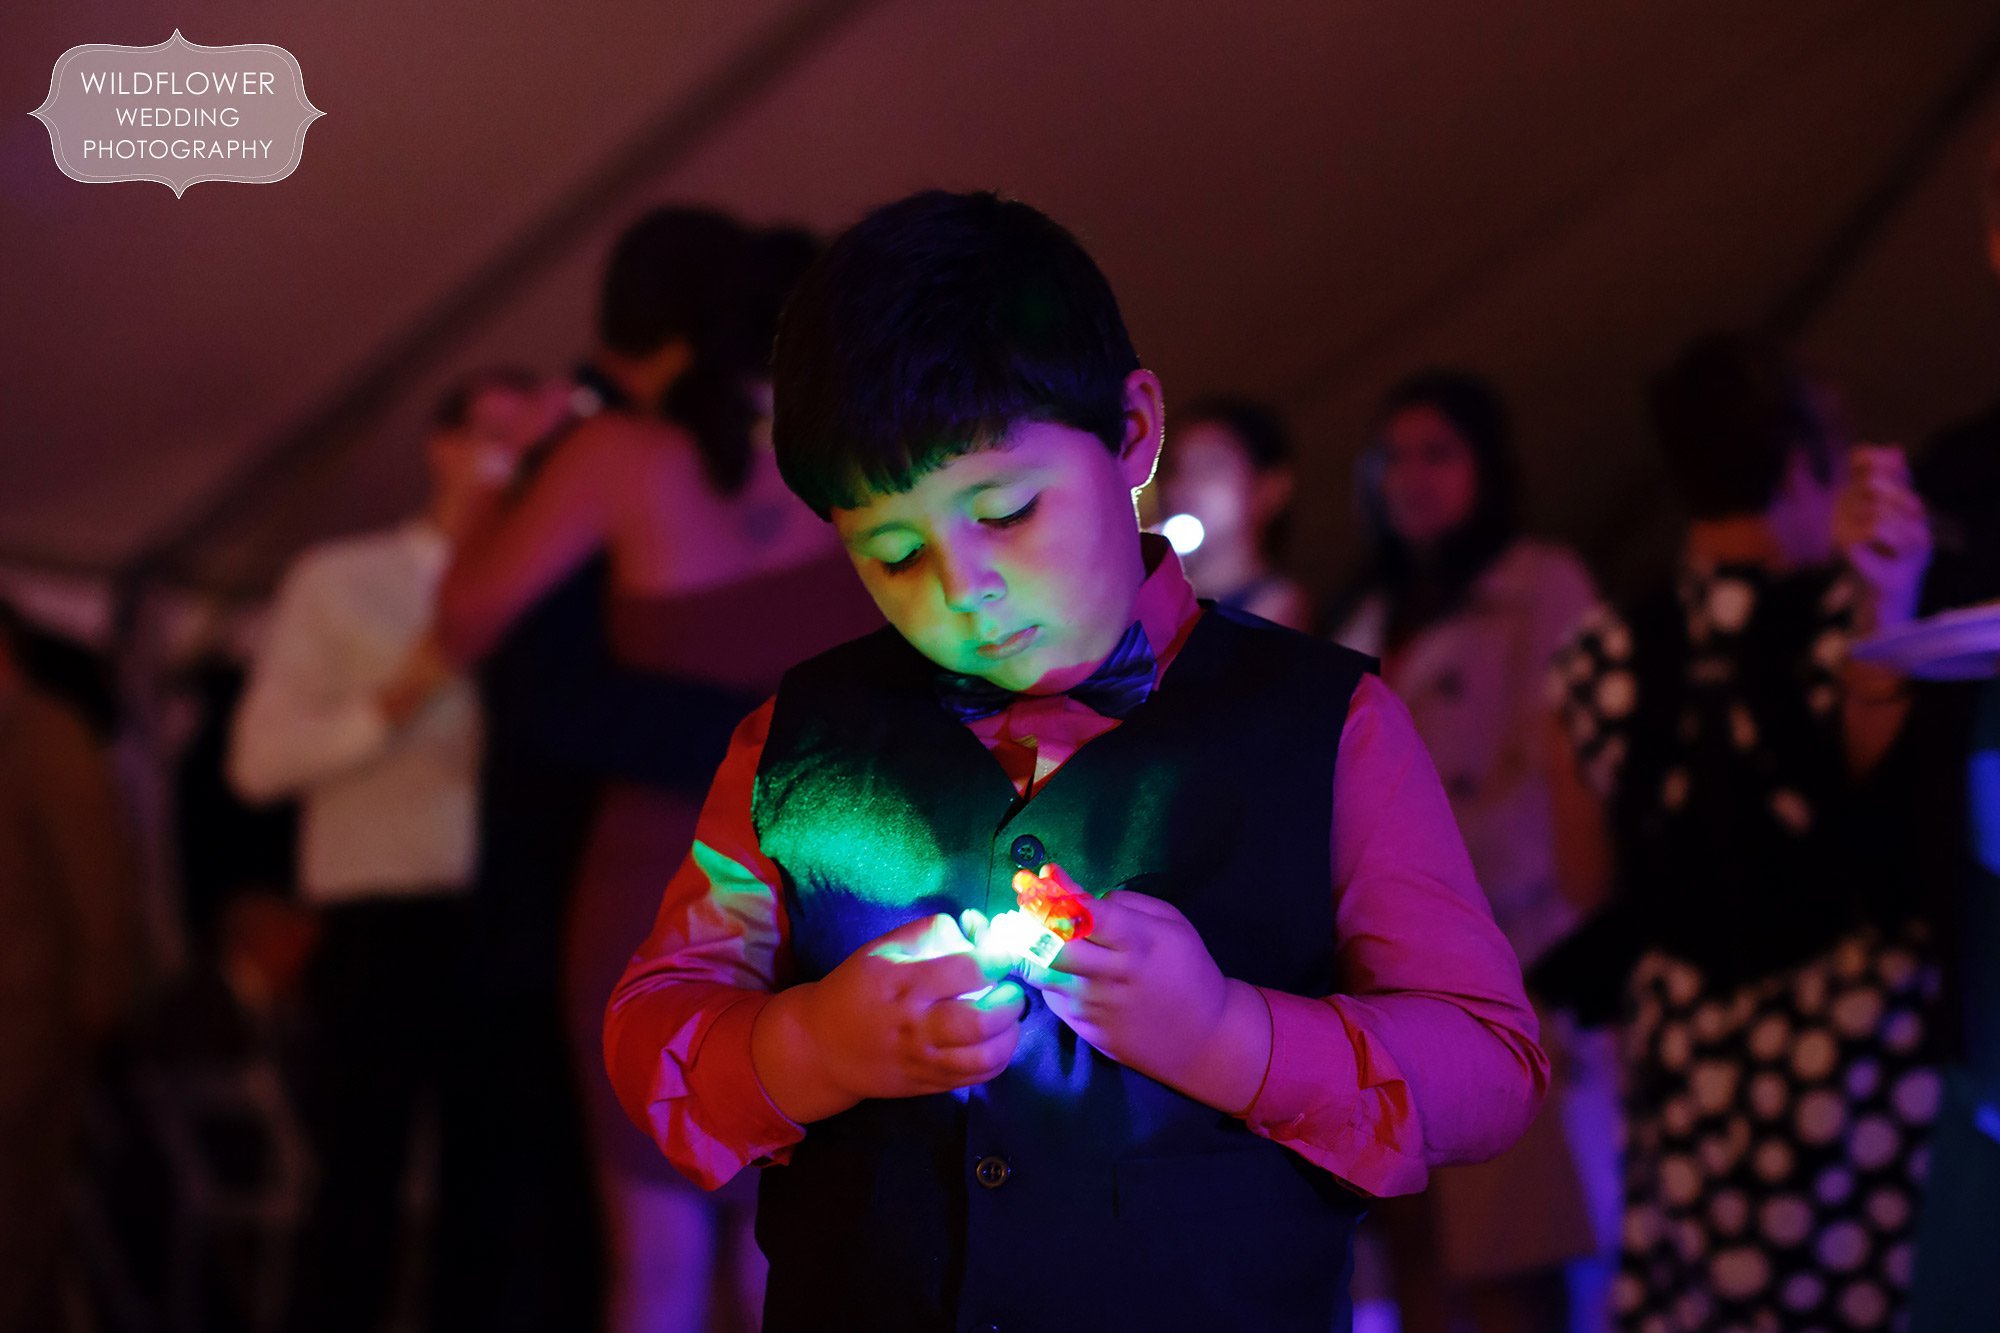 Unique photo of a little boy with a glow ring at this backyard wedding reception in St. Louis.